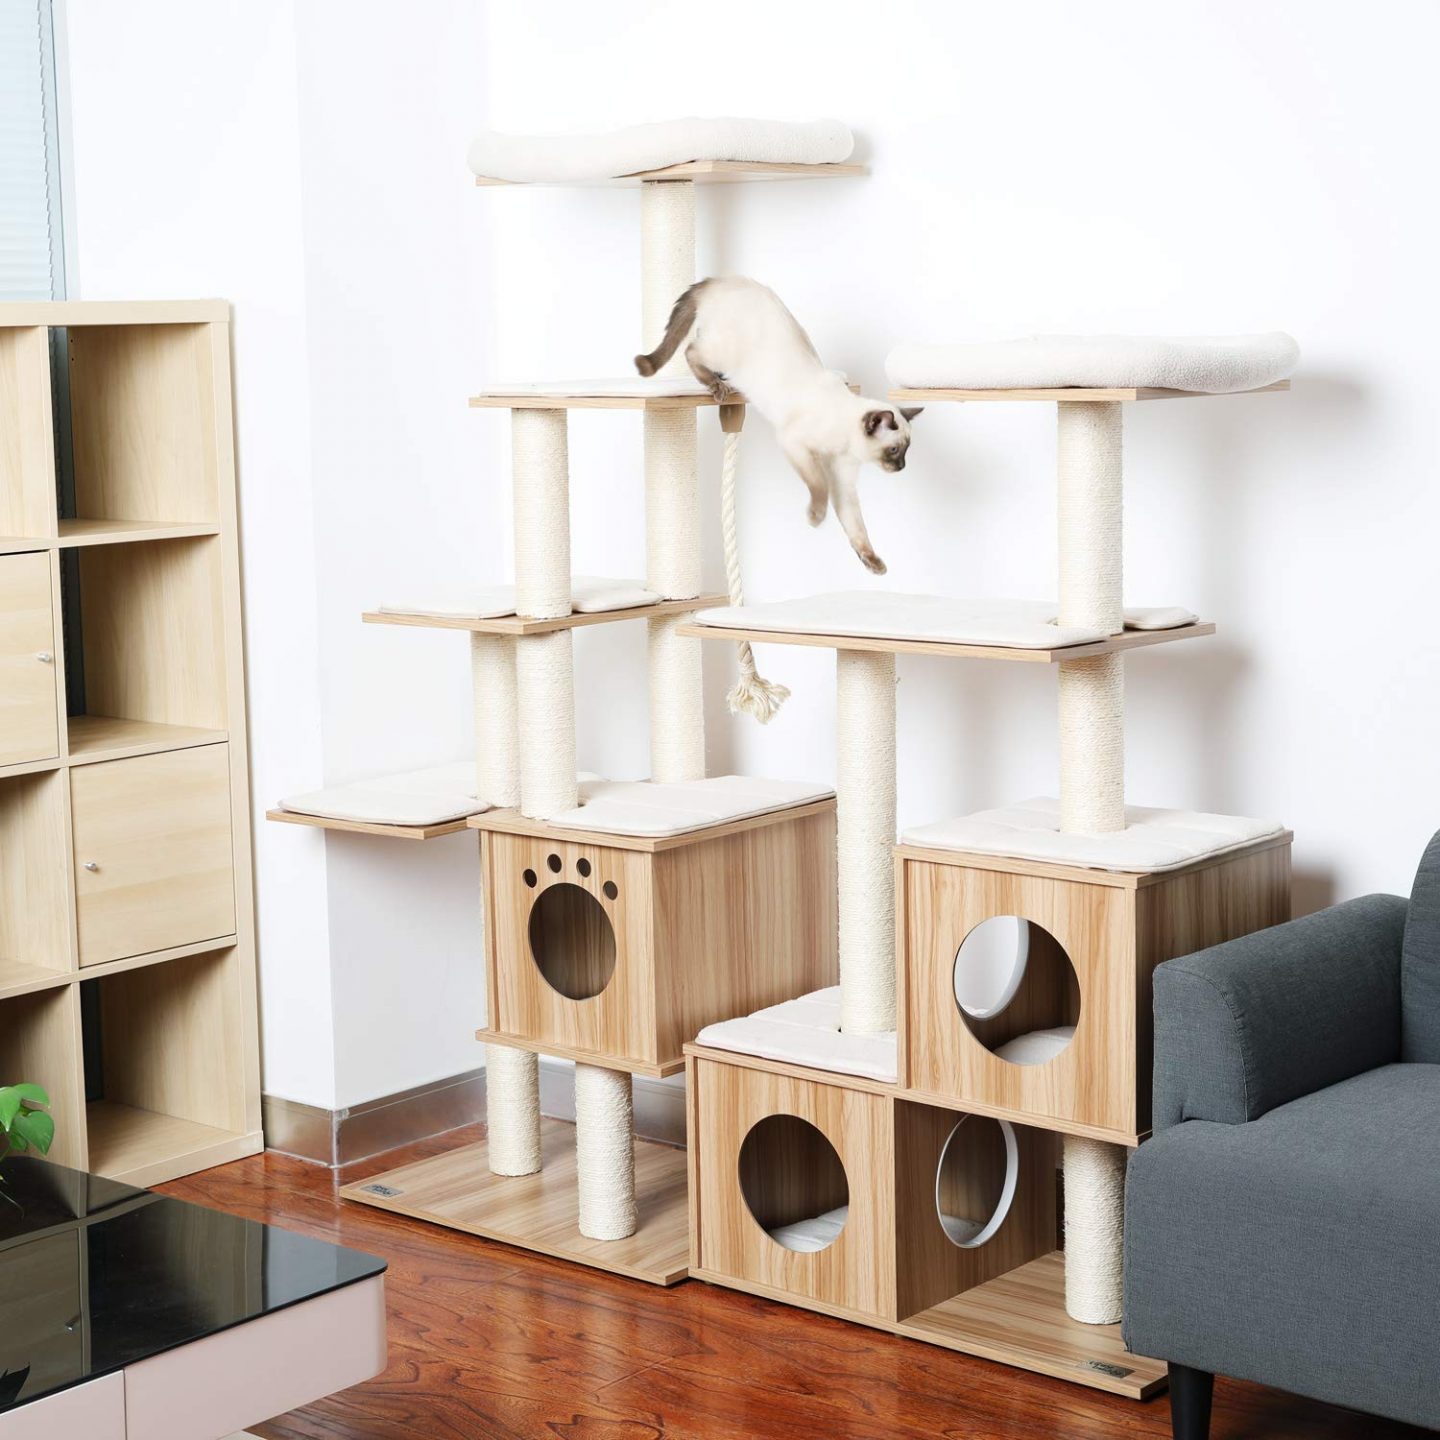 If you like a cat tree you already have, but want something bigger that still fits in with your decor and the other cat furniture you already have, you can try getting another of the same or similar cat trees and snugging them up together to make a big cat play gym.